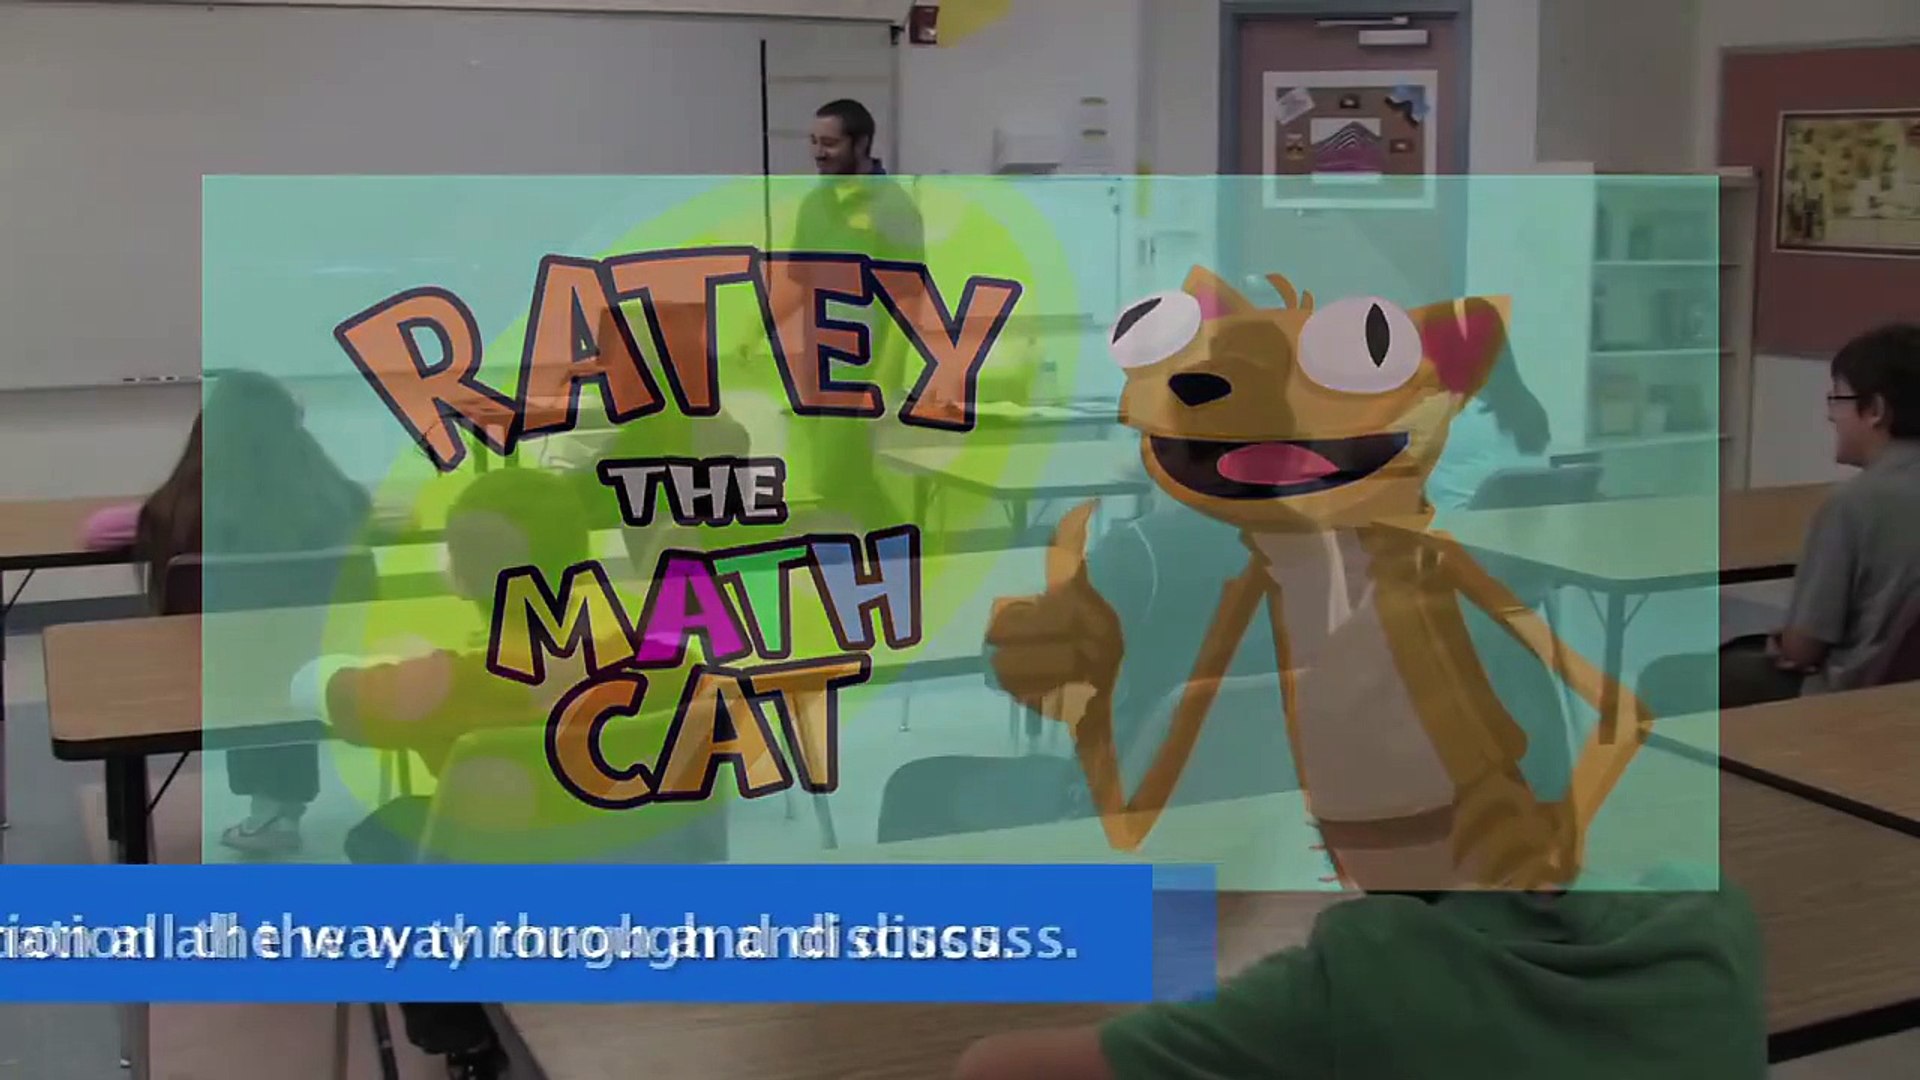 Math Snacks - Teaching With Ratey The Math Cat